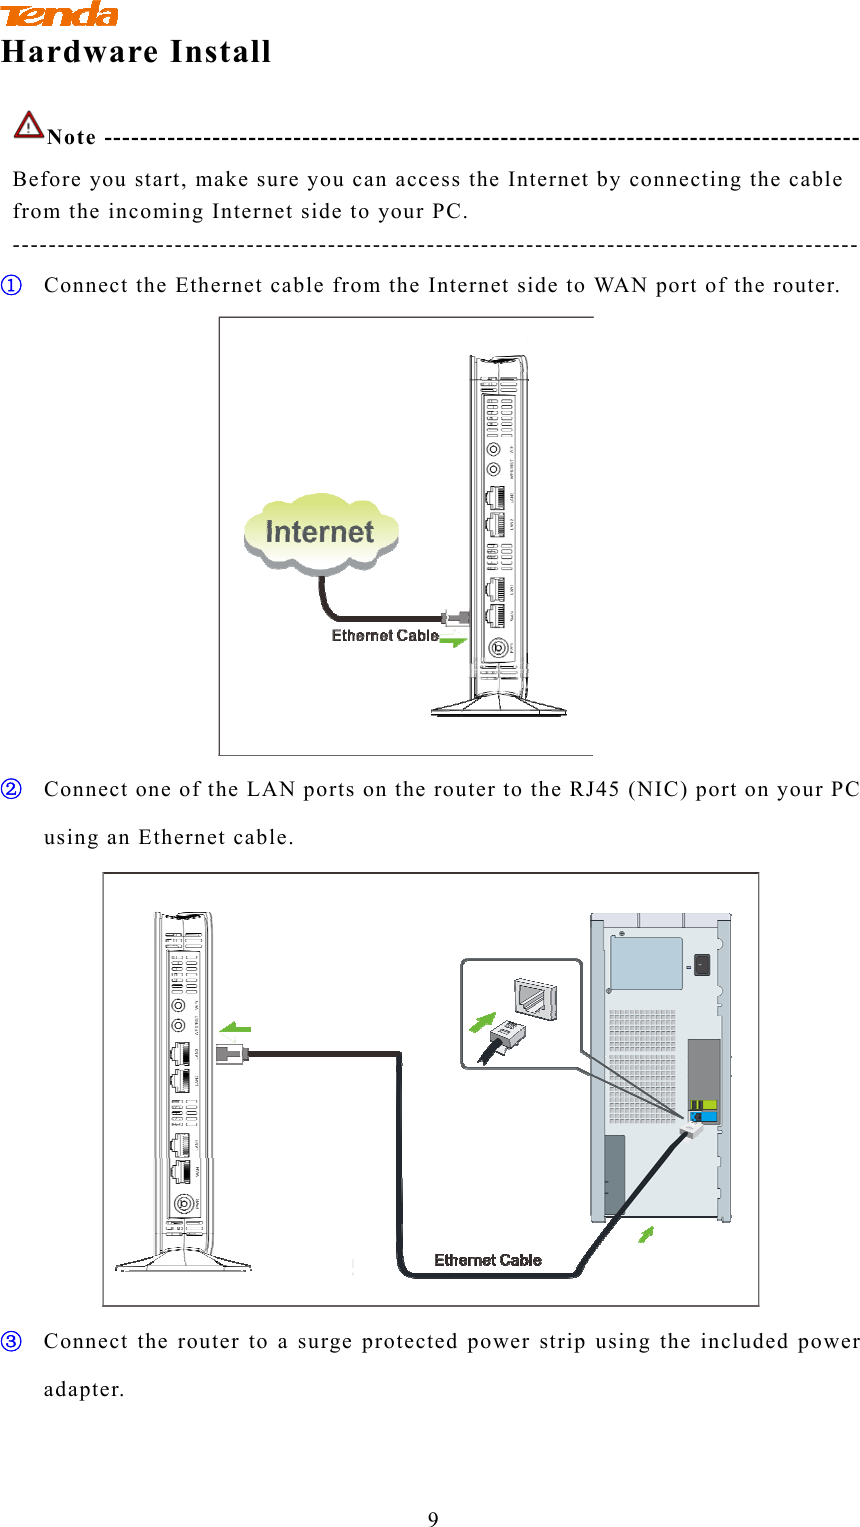                                        9 Hardware Install Note ------------------------------------------------------------------------------------ Before you start, make sure you can access the Internet by connecting the cable from the incoming Internet side to your PC. ---------------------------------------------------------------------------------------------- ①  Connect the Ethernet cable from the Internet side to WAN port of the router.  ② Connect one of the LAN ports on the router to the RJ45 (NIC) port on your PC using an Ethernet cable.  ③ Connect the router to a surge protected power strip using the included power adapter. 